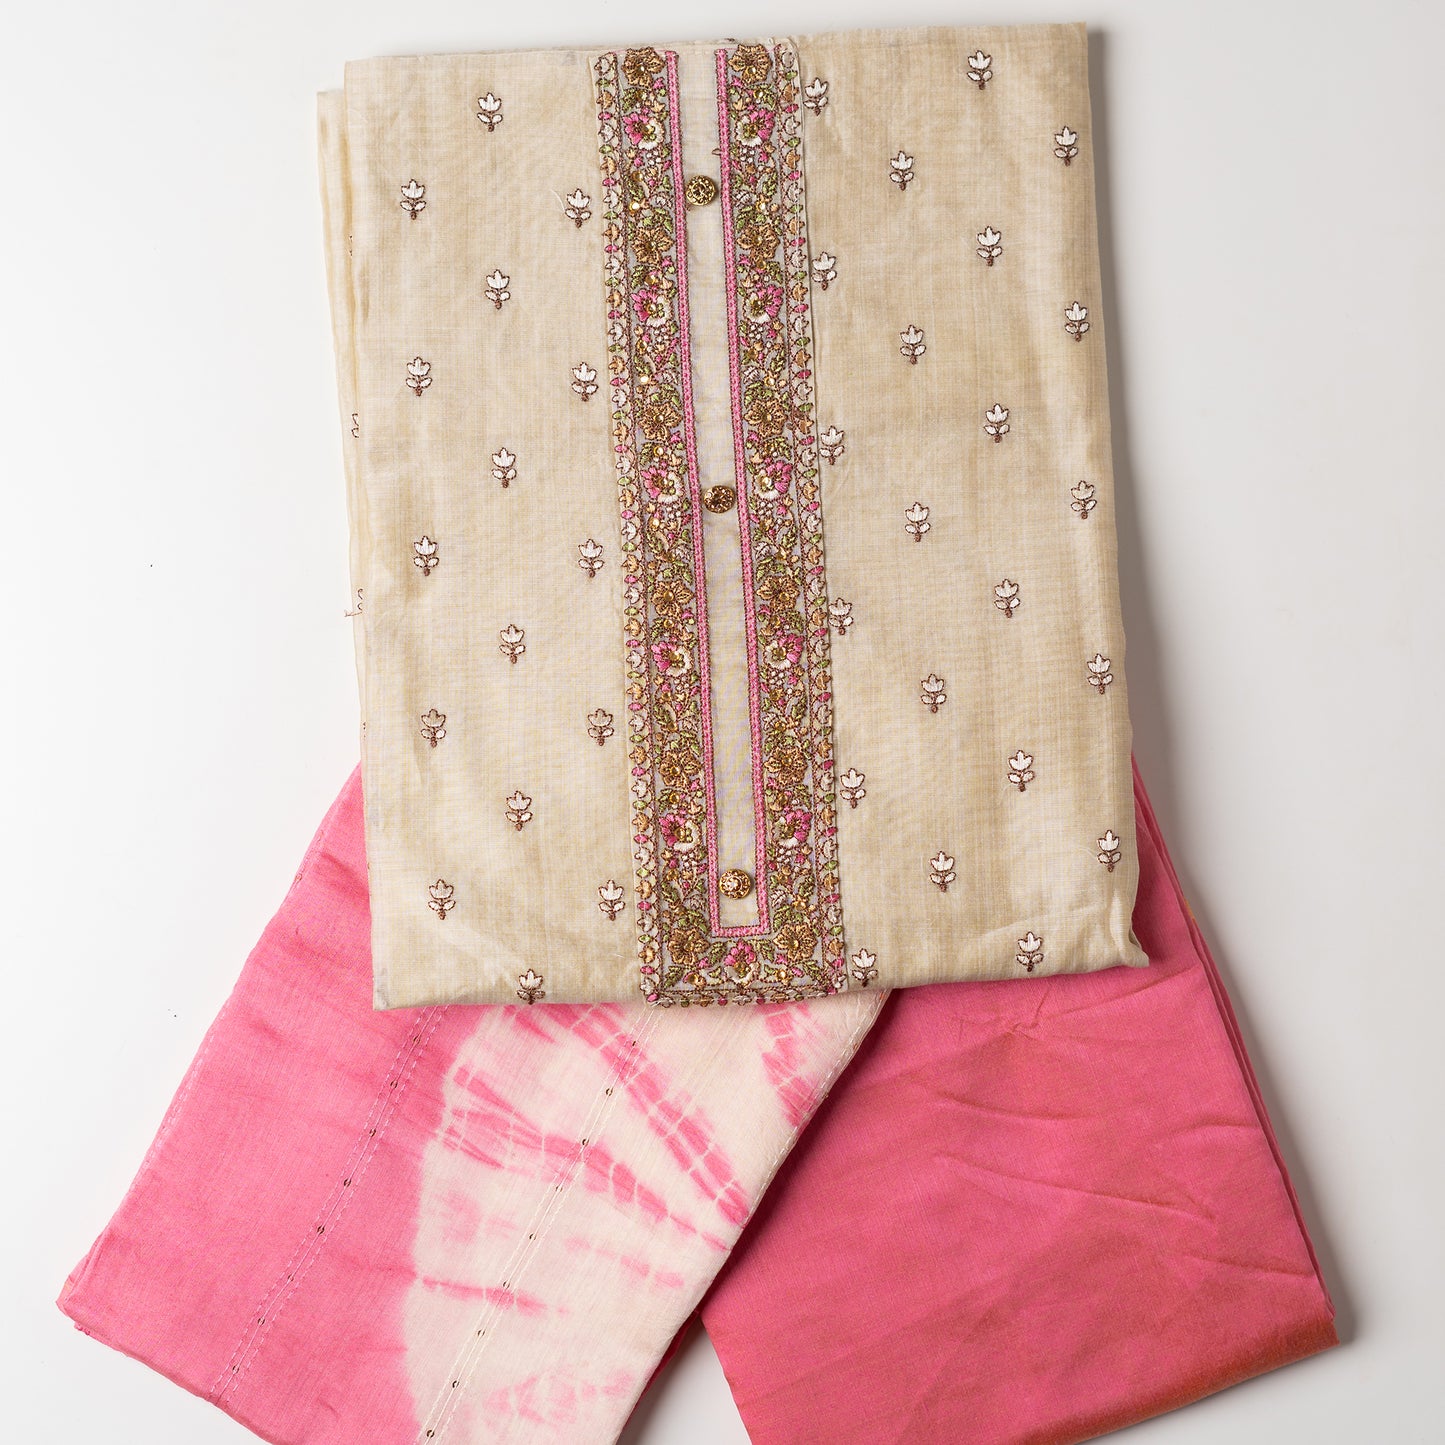 unstitched chanderi silk dress material set, Ivory color Chanderi Silk top with self color floral embroidery all over the body in the front and elegant pink color embroidery work in neck line with show buttons. cotton pink color plain bottom. Pink and cream color silk dupatta with sequins and thread work 